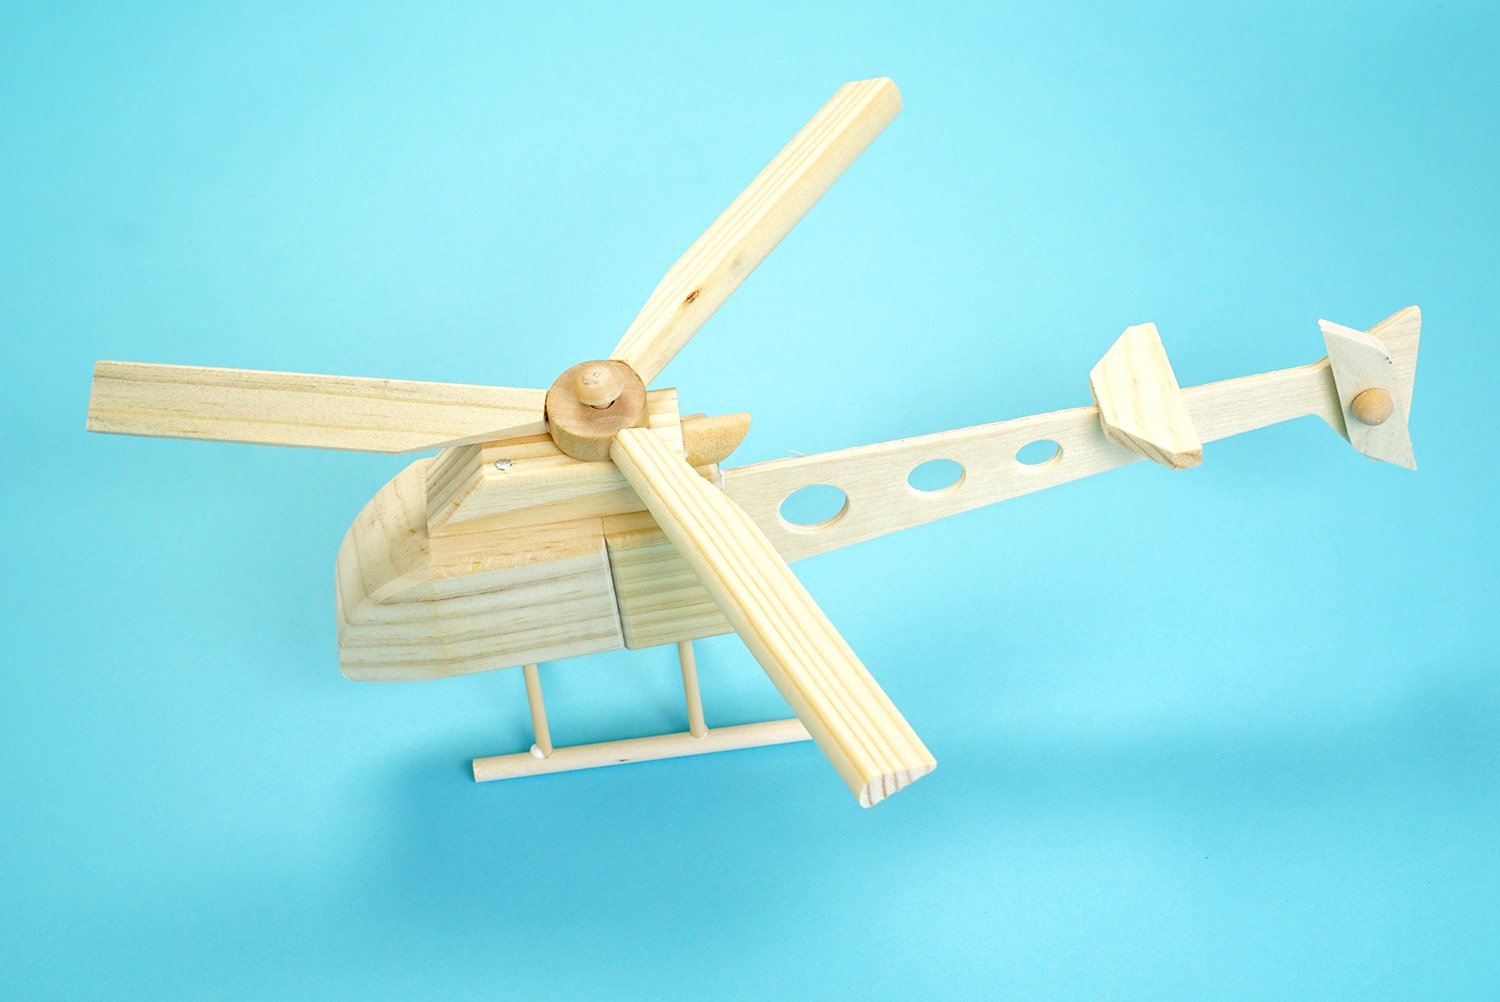 body of helicopter constructed and assembled 